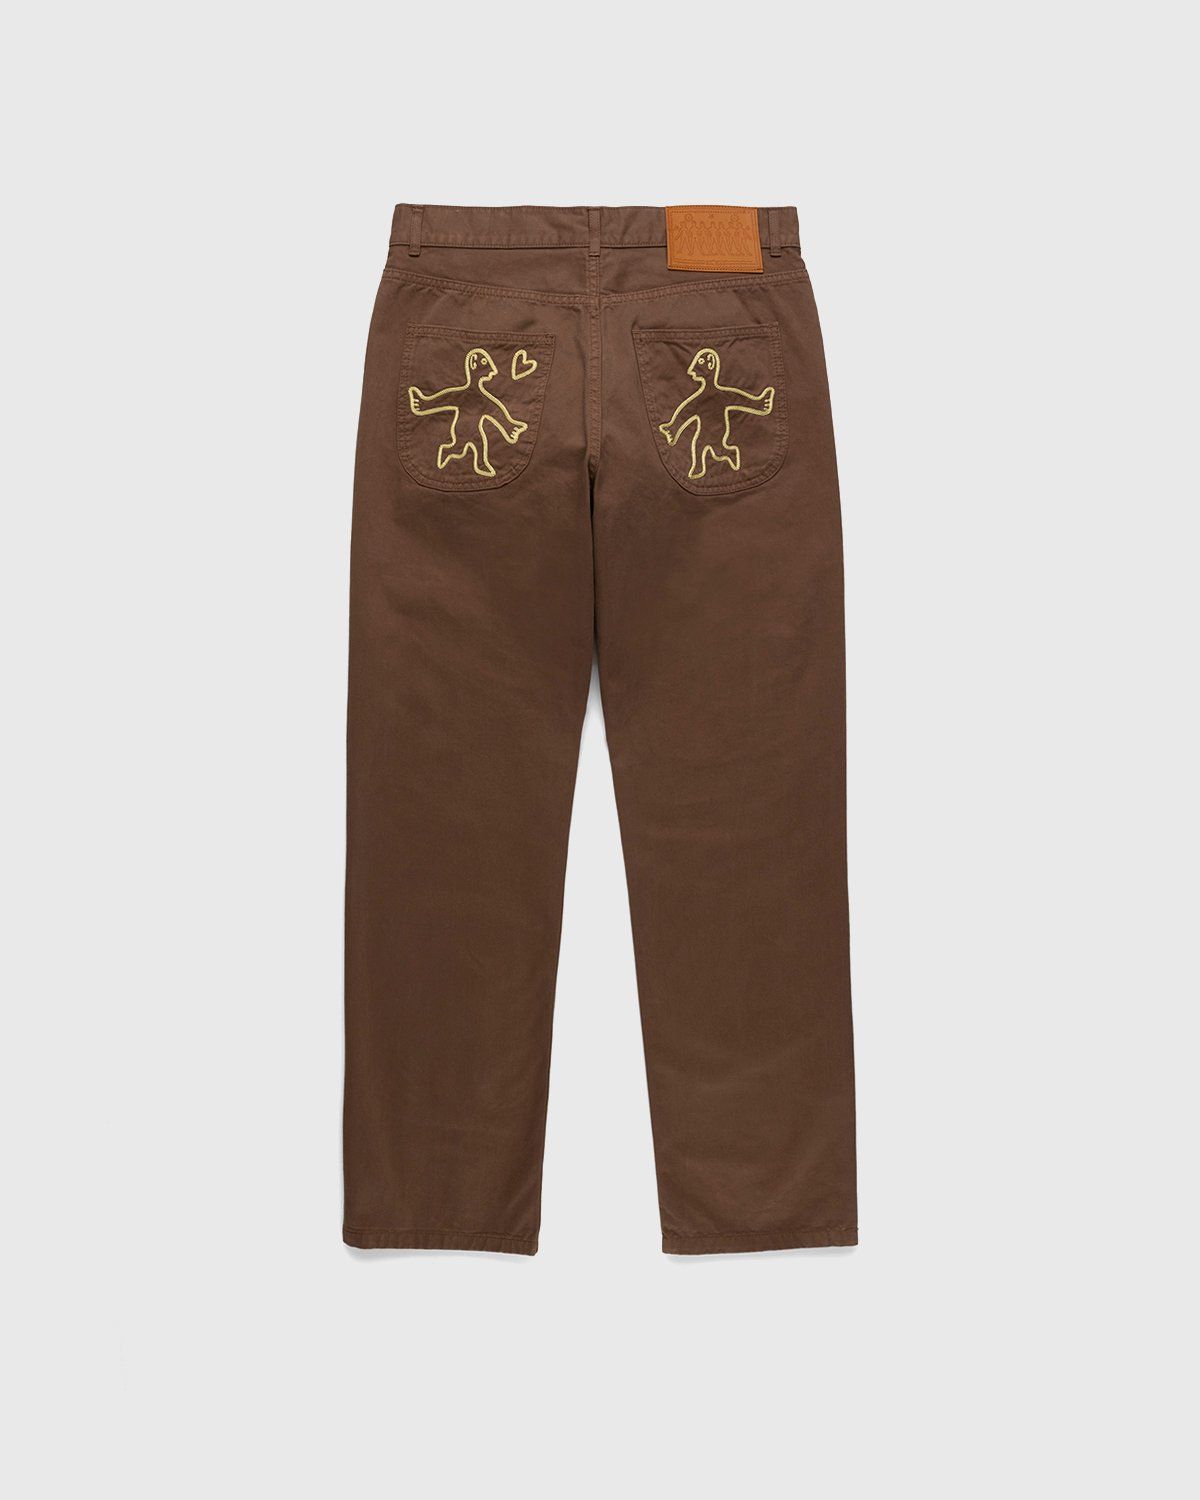 Carne Bollente – The Back Bump Trouser Brown - Image 2